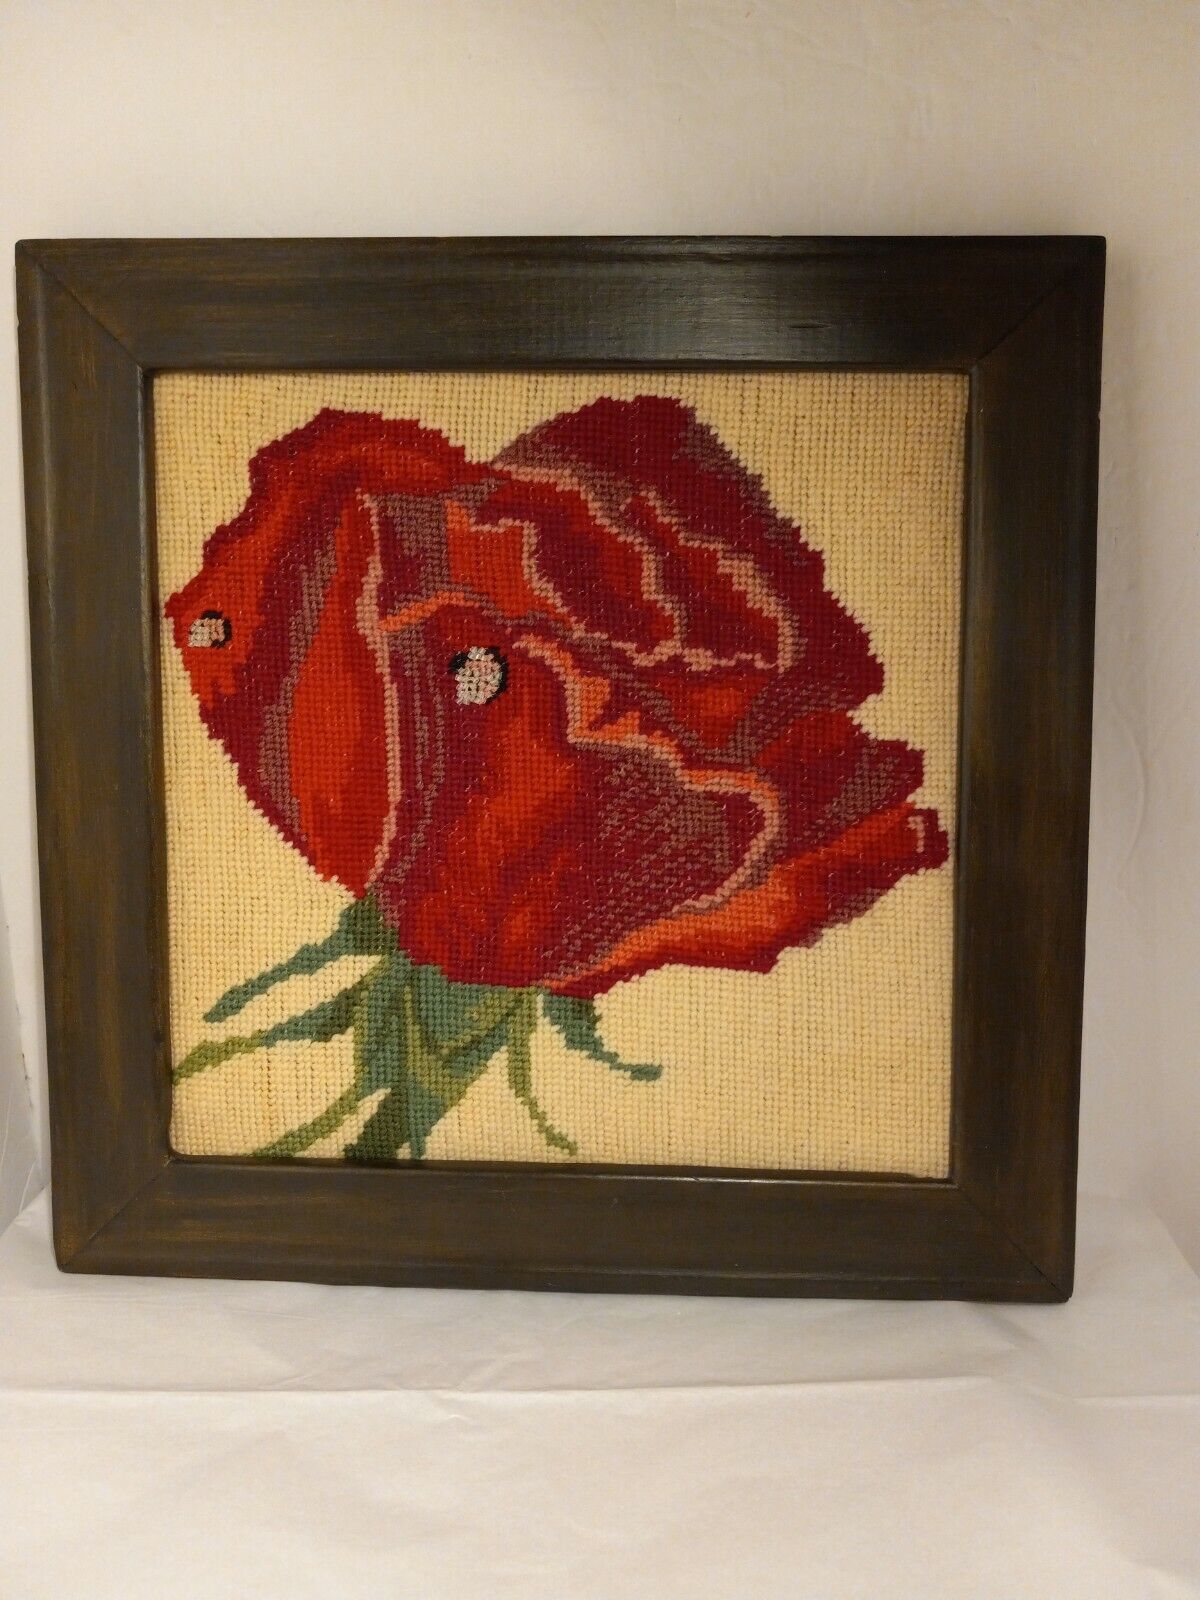 Our shop most popular Vintage Art Floral Needlepoint Square Pattern Limited Special Price 1 Framed Poppy Red